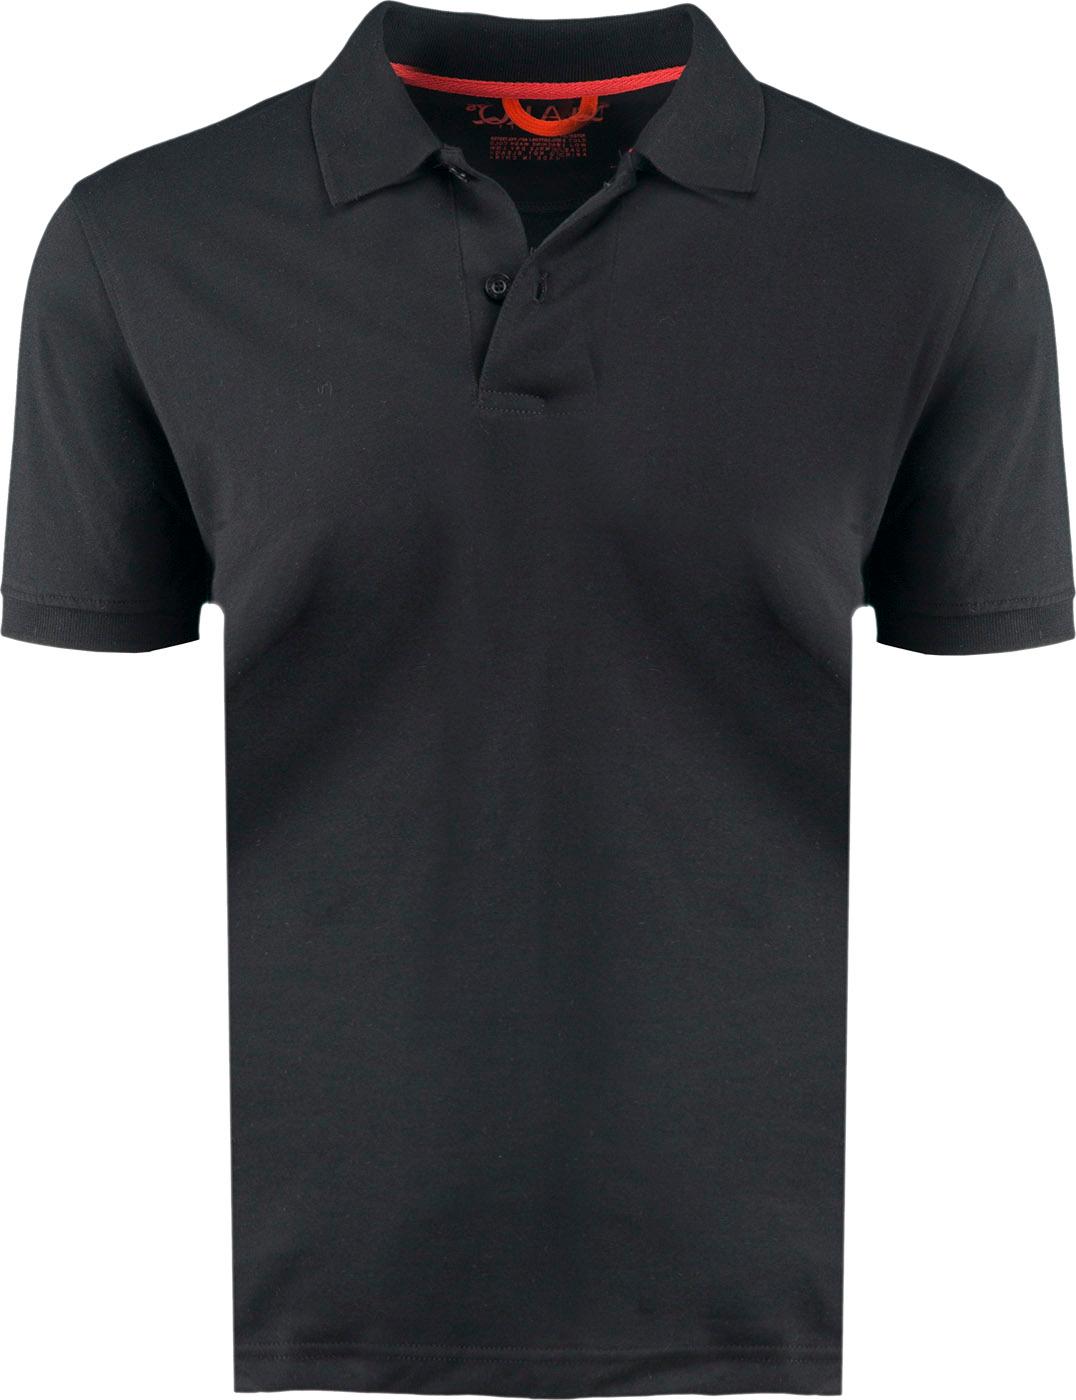  Jersey Polo Slim Fit S/S - Black